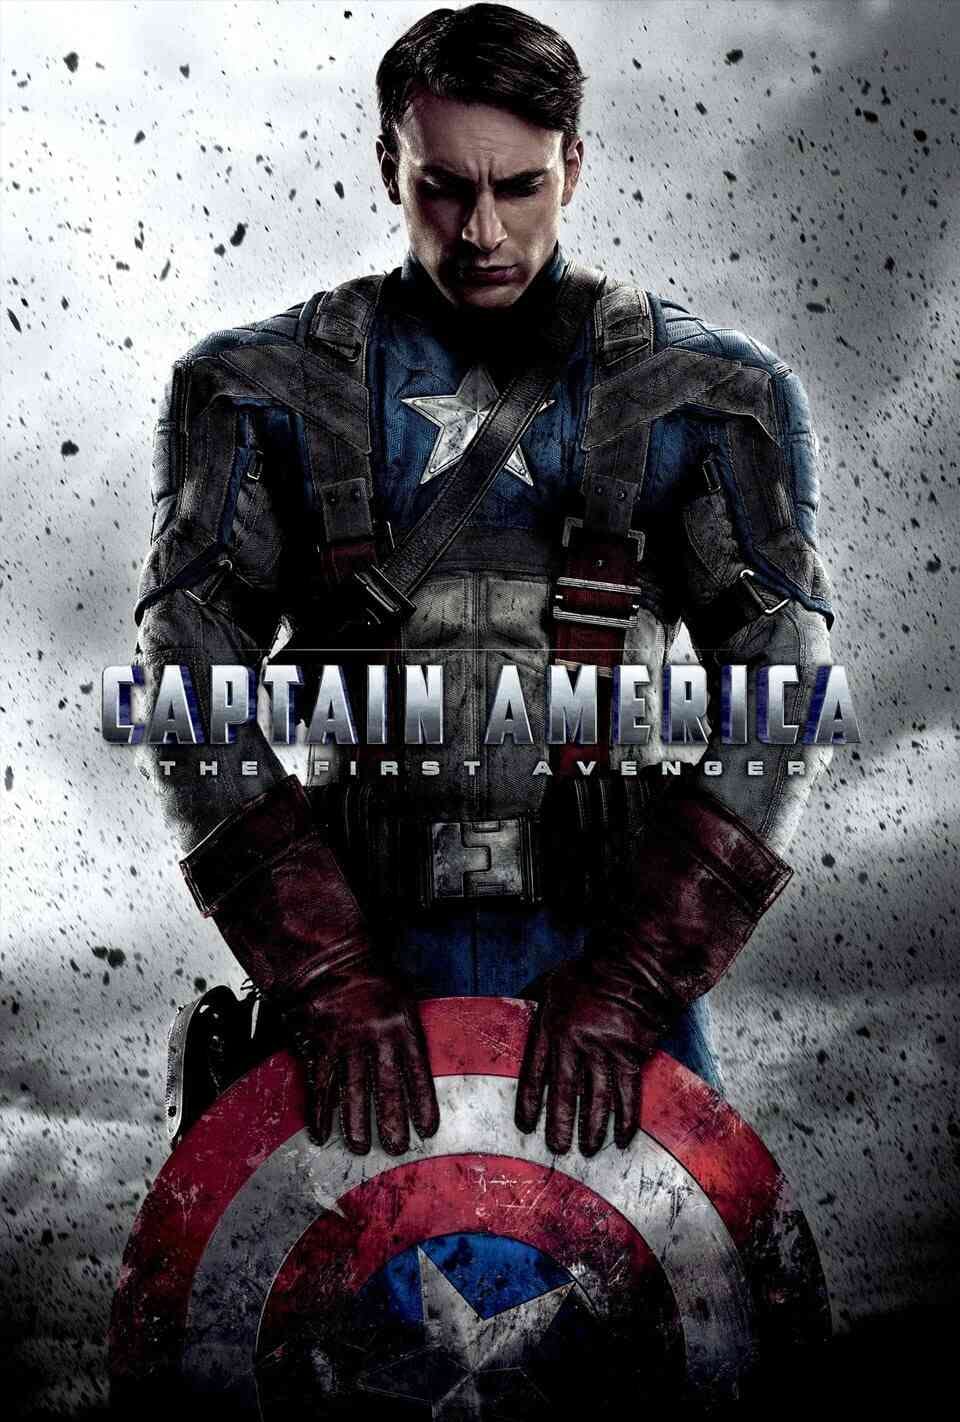 Read The First Avenger screenplay (poster)